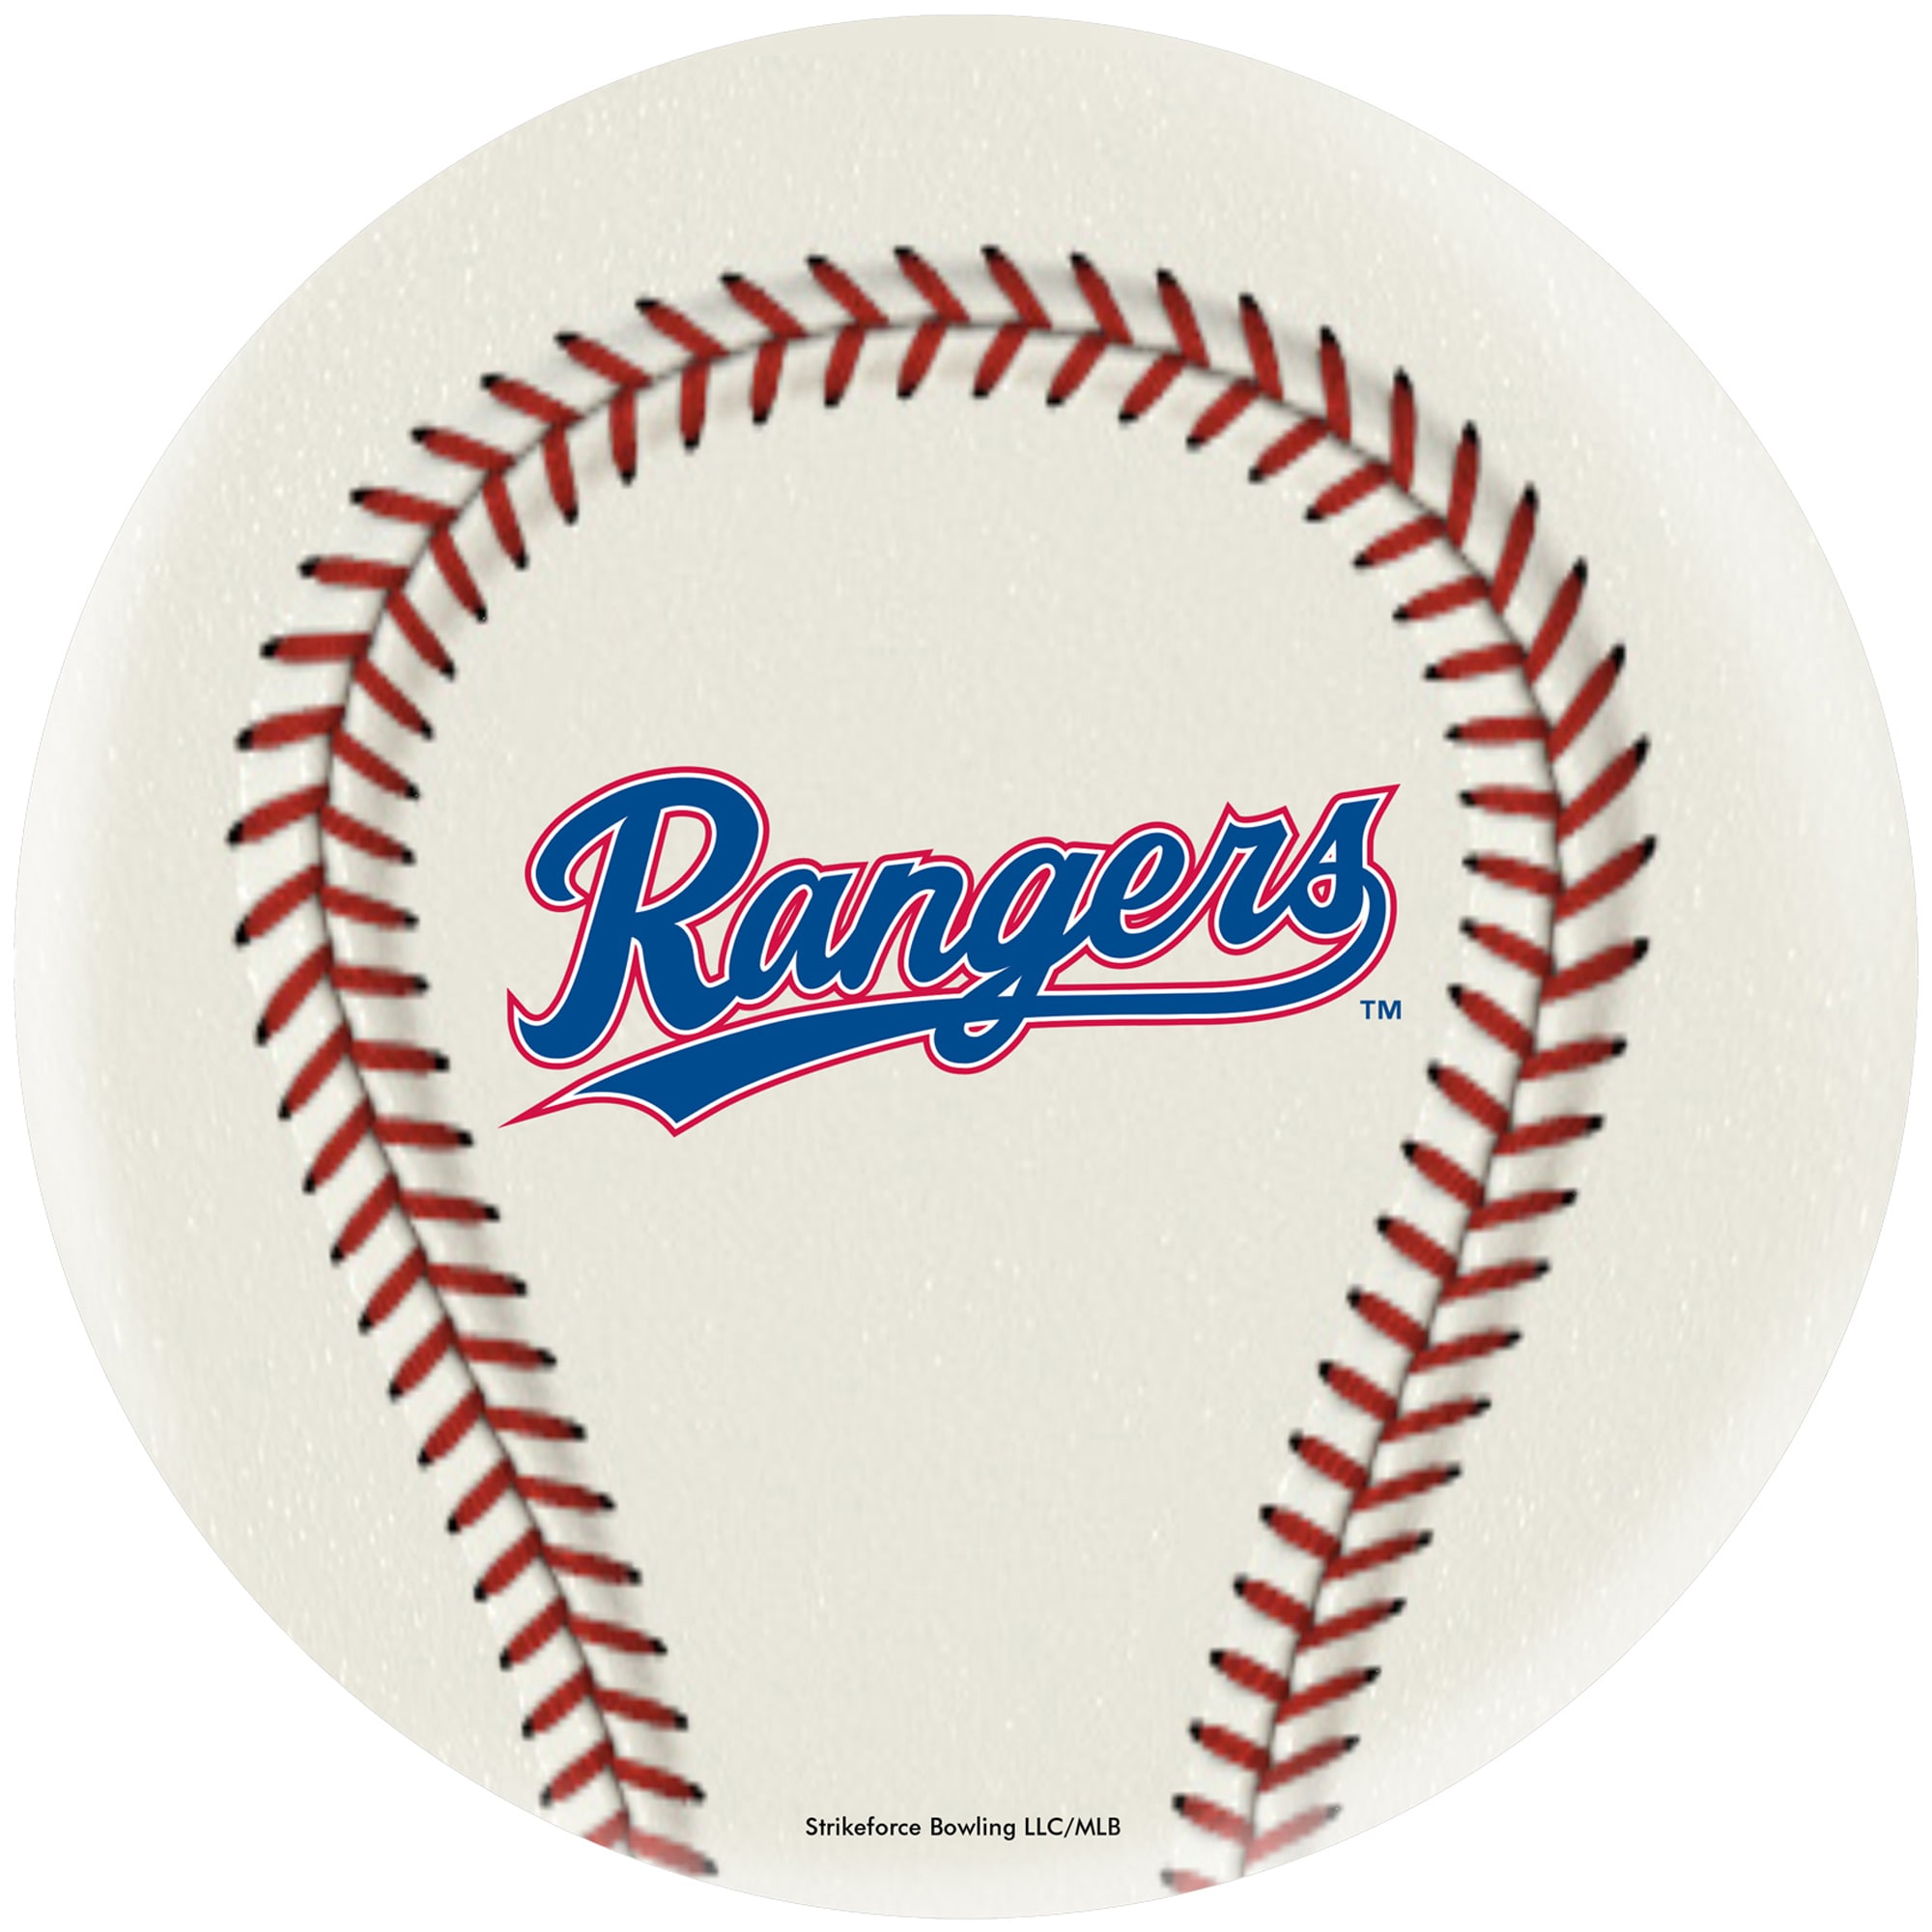 Texas Rangers Undrilled Bowling Ball - image 2 of 2